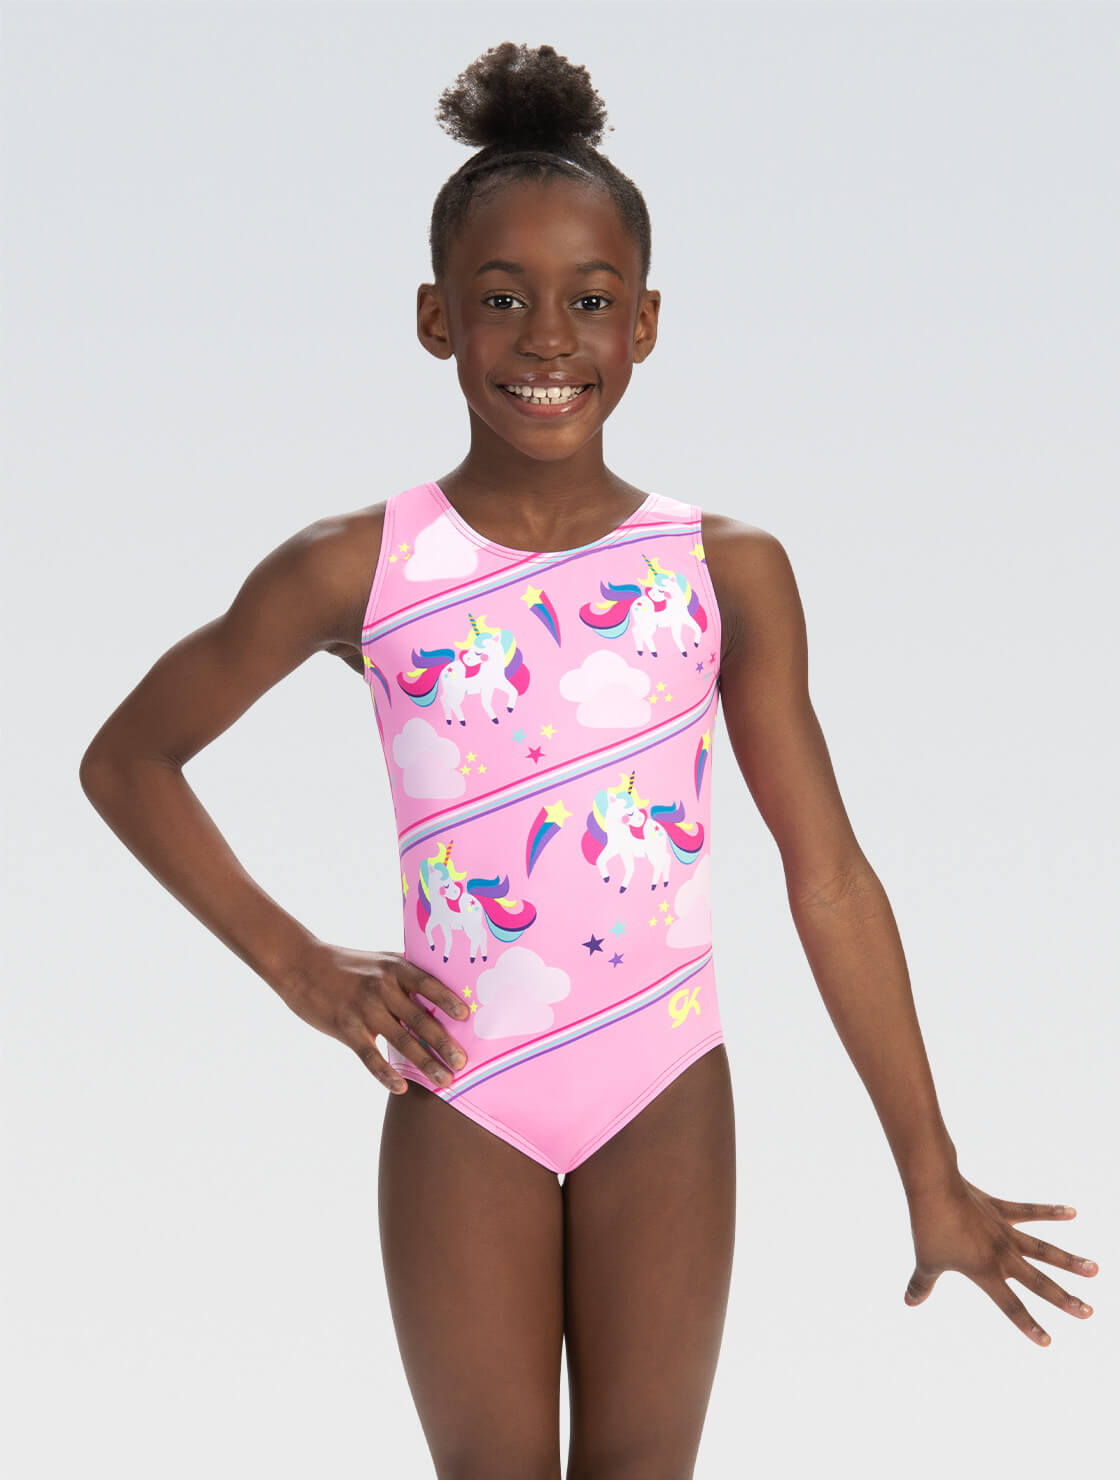 TFJH E Kids Little Girls' One Piece Sparkly Gymnastics Leotard Practice  Outfits, B Blue Dot, 3-4Years : Amazon.in: Clothing & Accessories